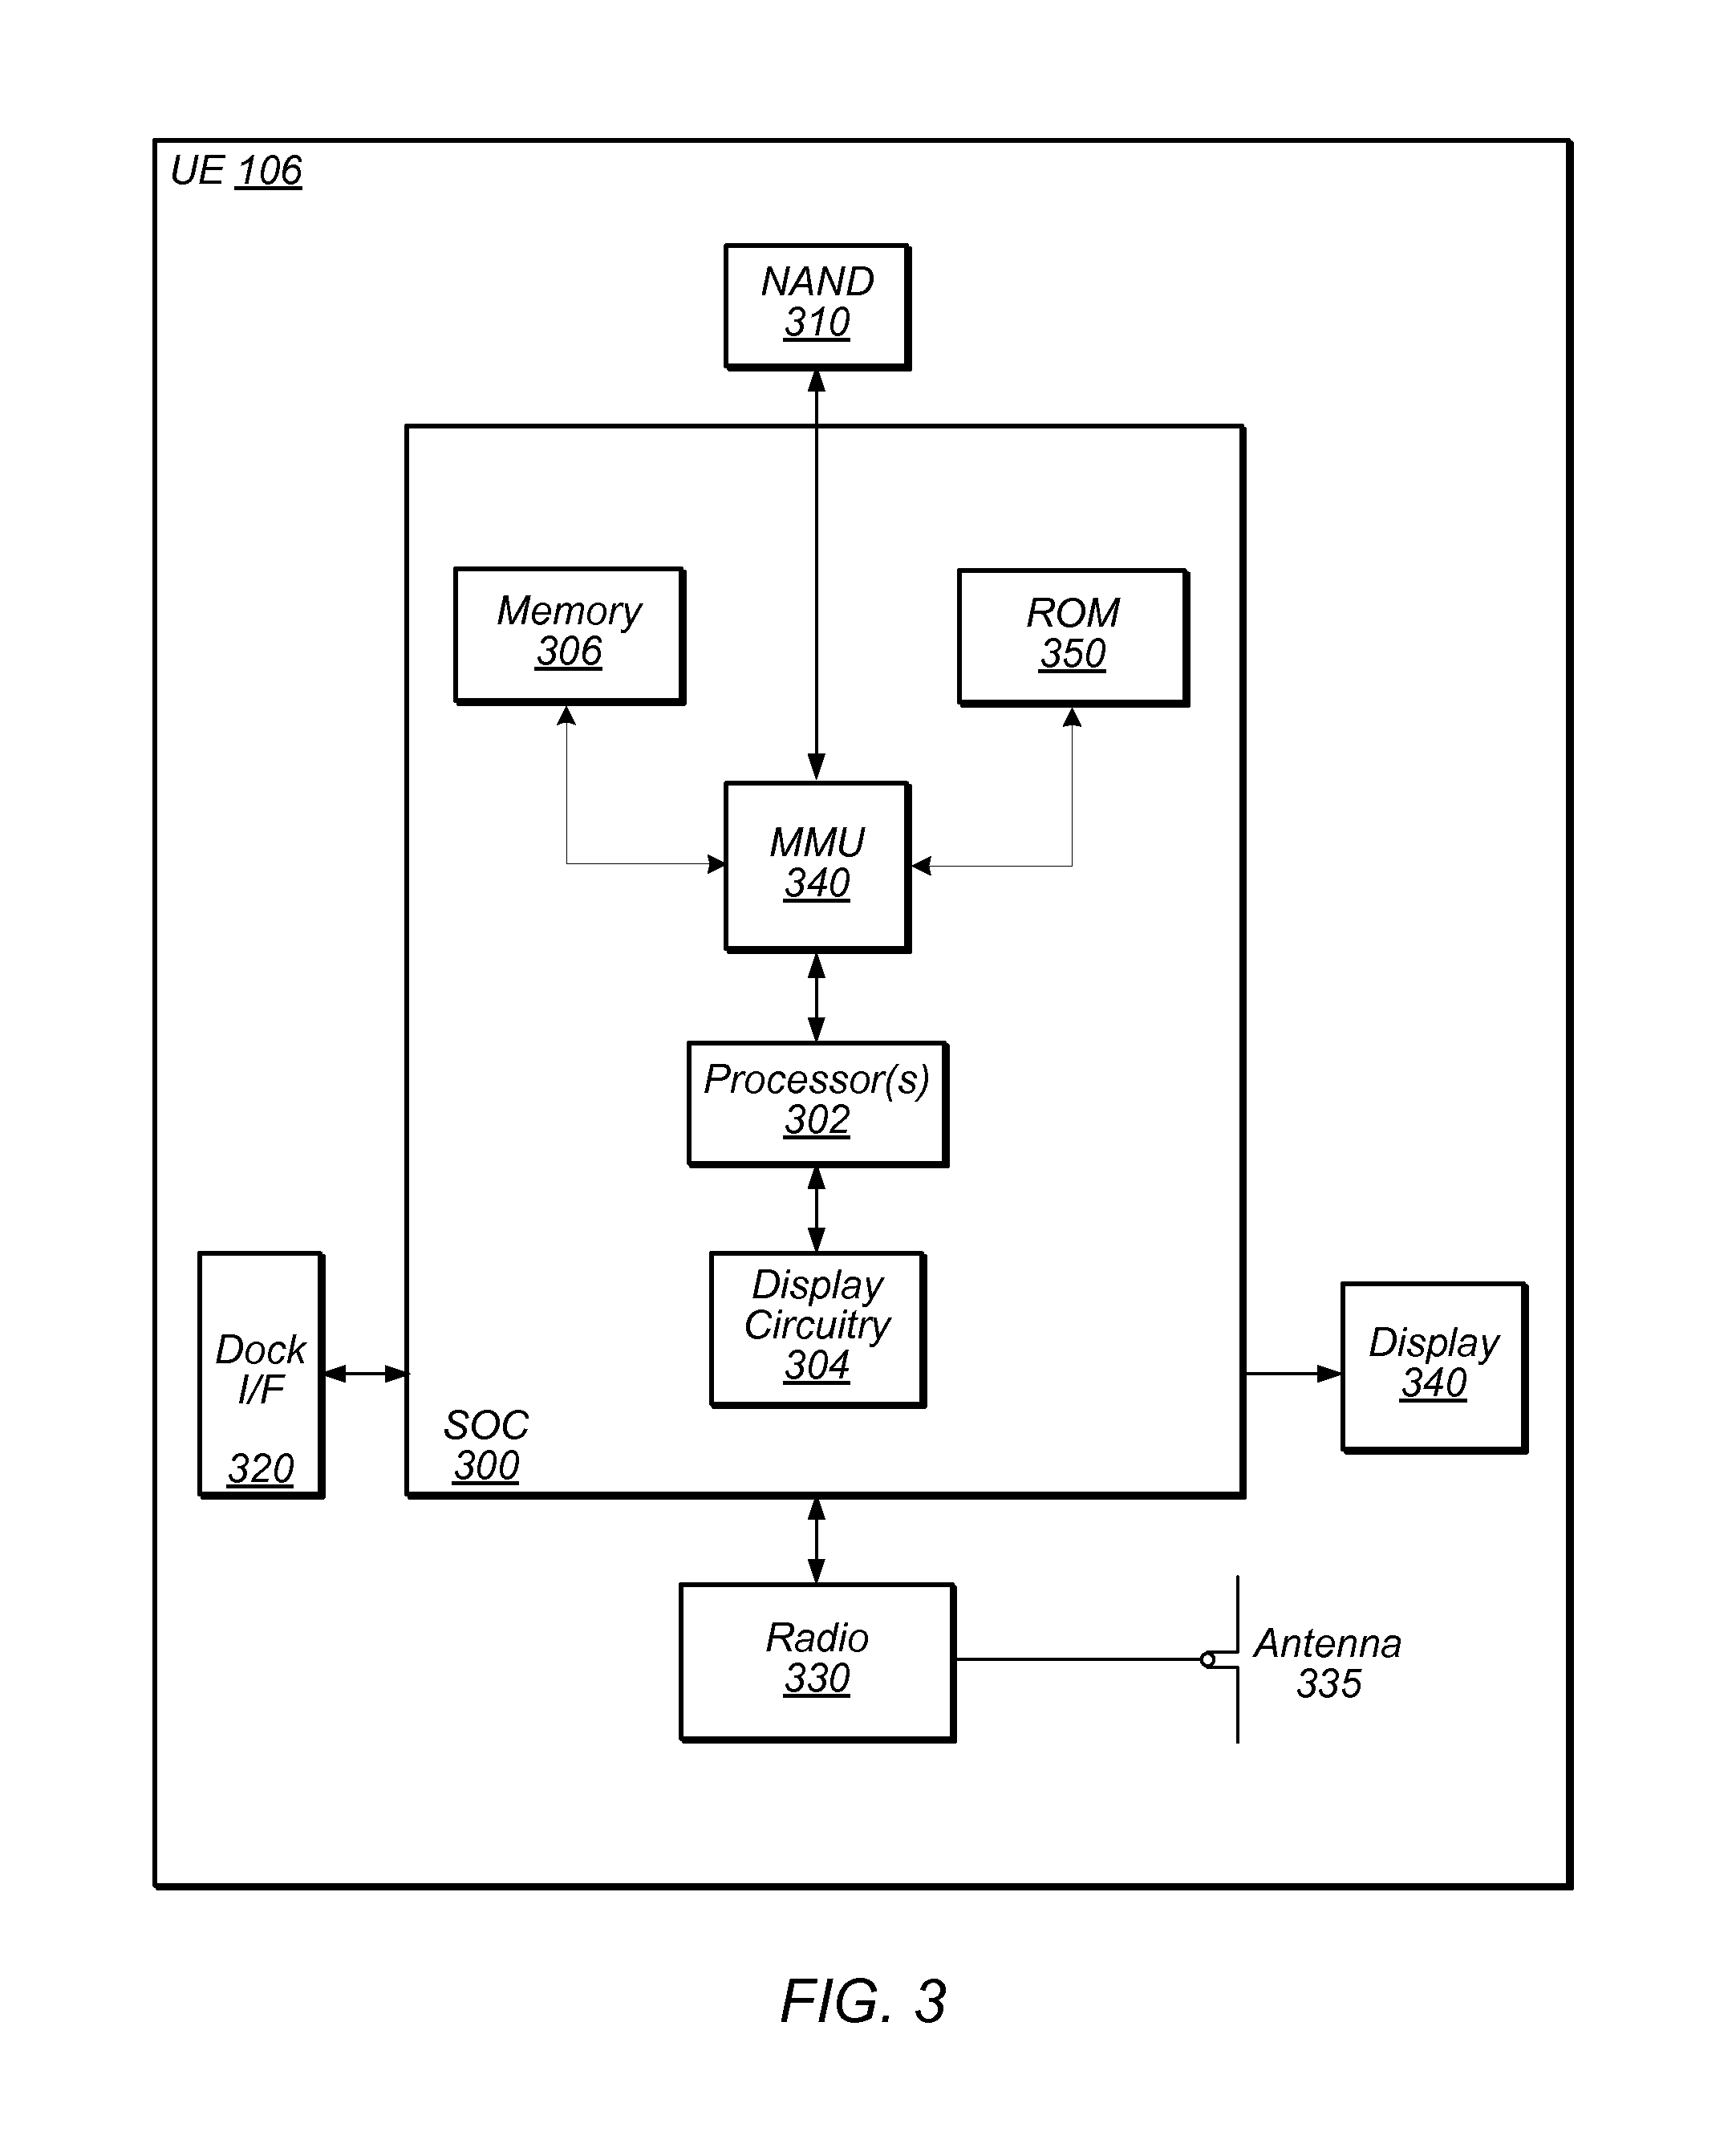 Reducing Power Consumption in Voice over LTE Terminals using Semi Persistent Scheduling in Connected Discontinuous Reception Mode